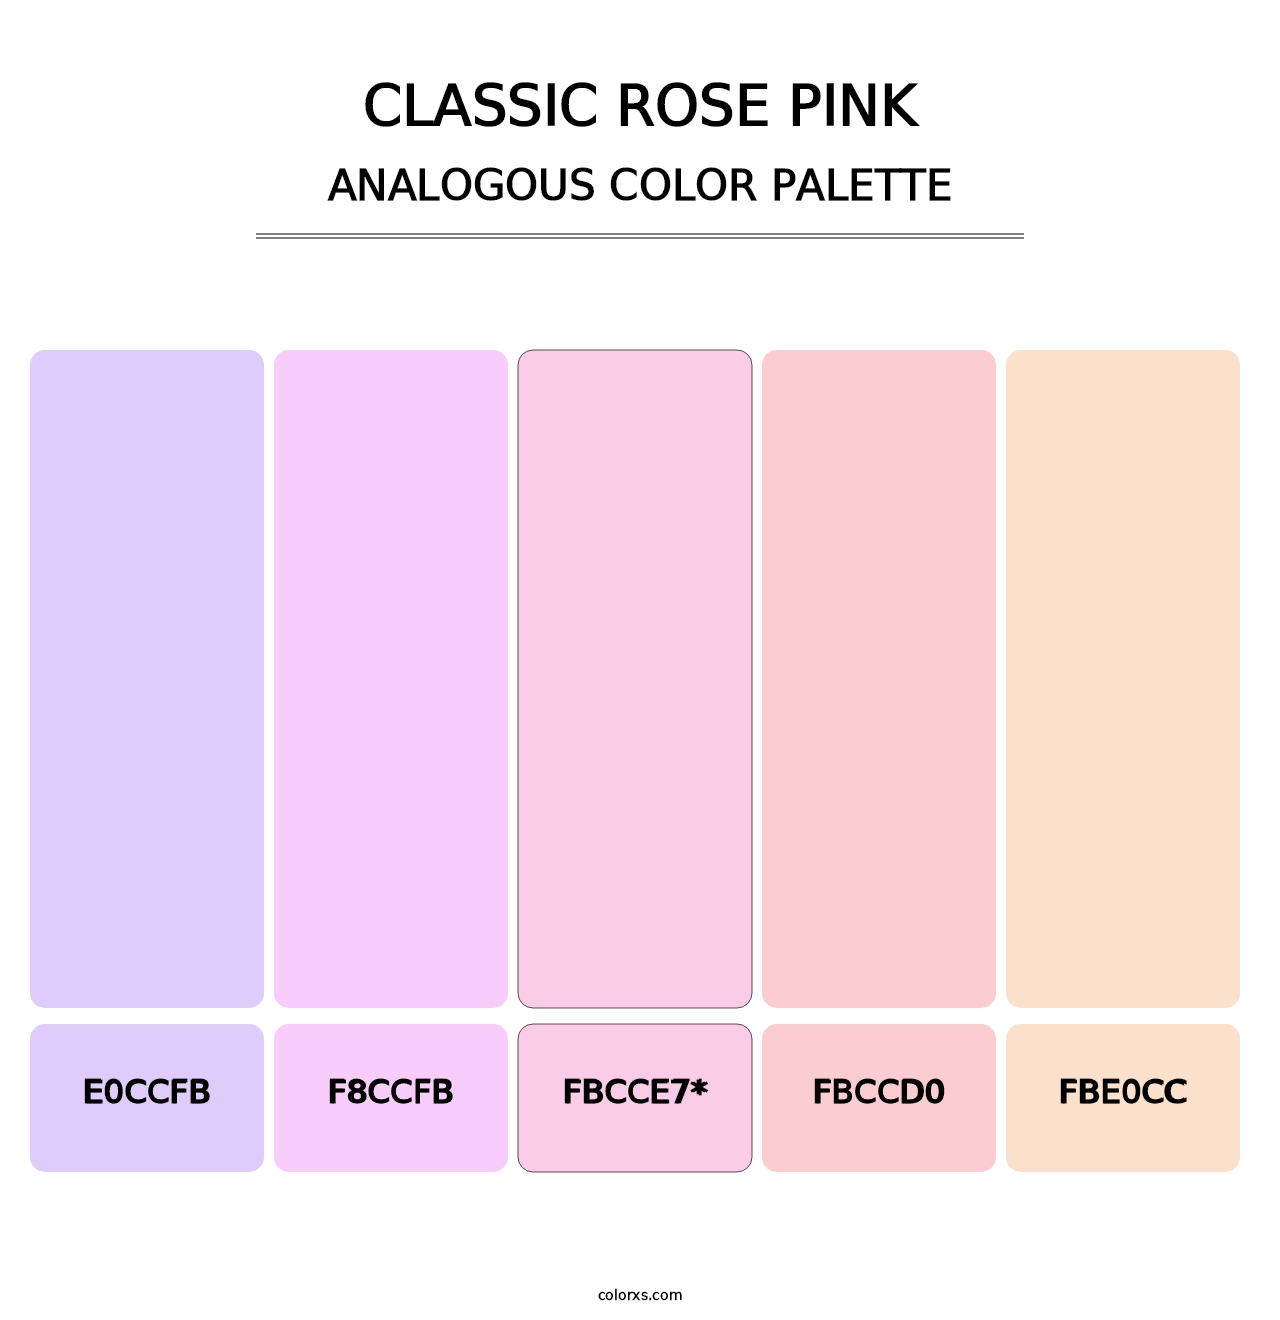 Classic Rose Pink - Analogous Color Palette